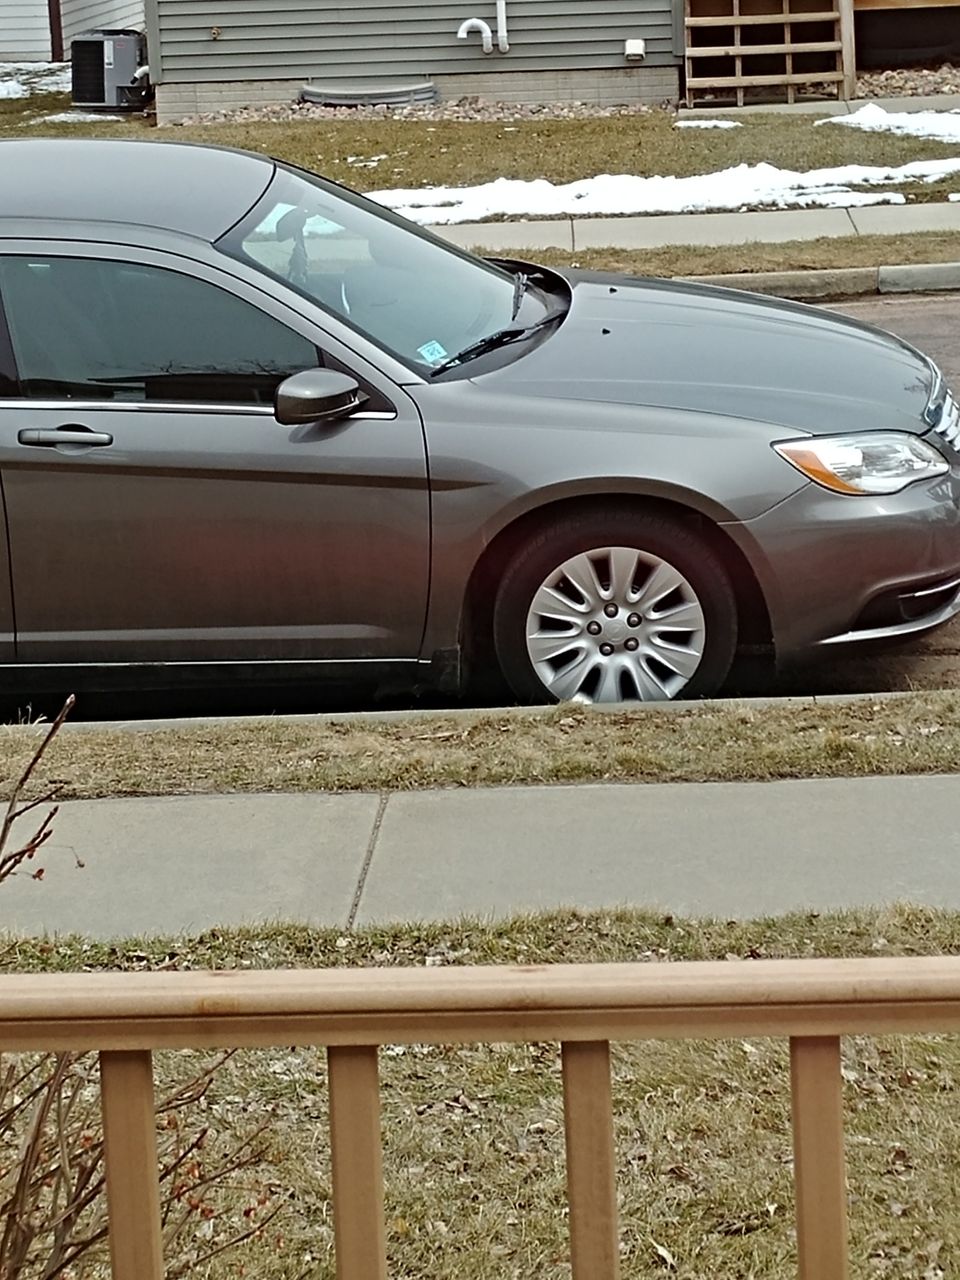 2012 Chrysler 200 | Sioux Falls, SD, Bright Silver Metallic Clear Coat (Silver), Front Wheel